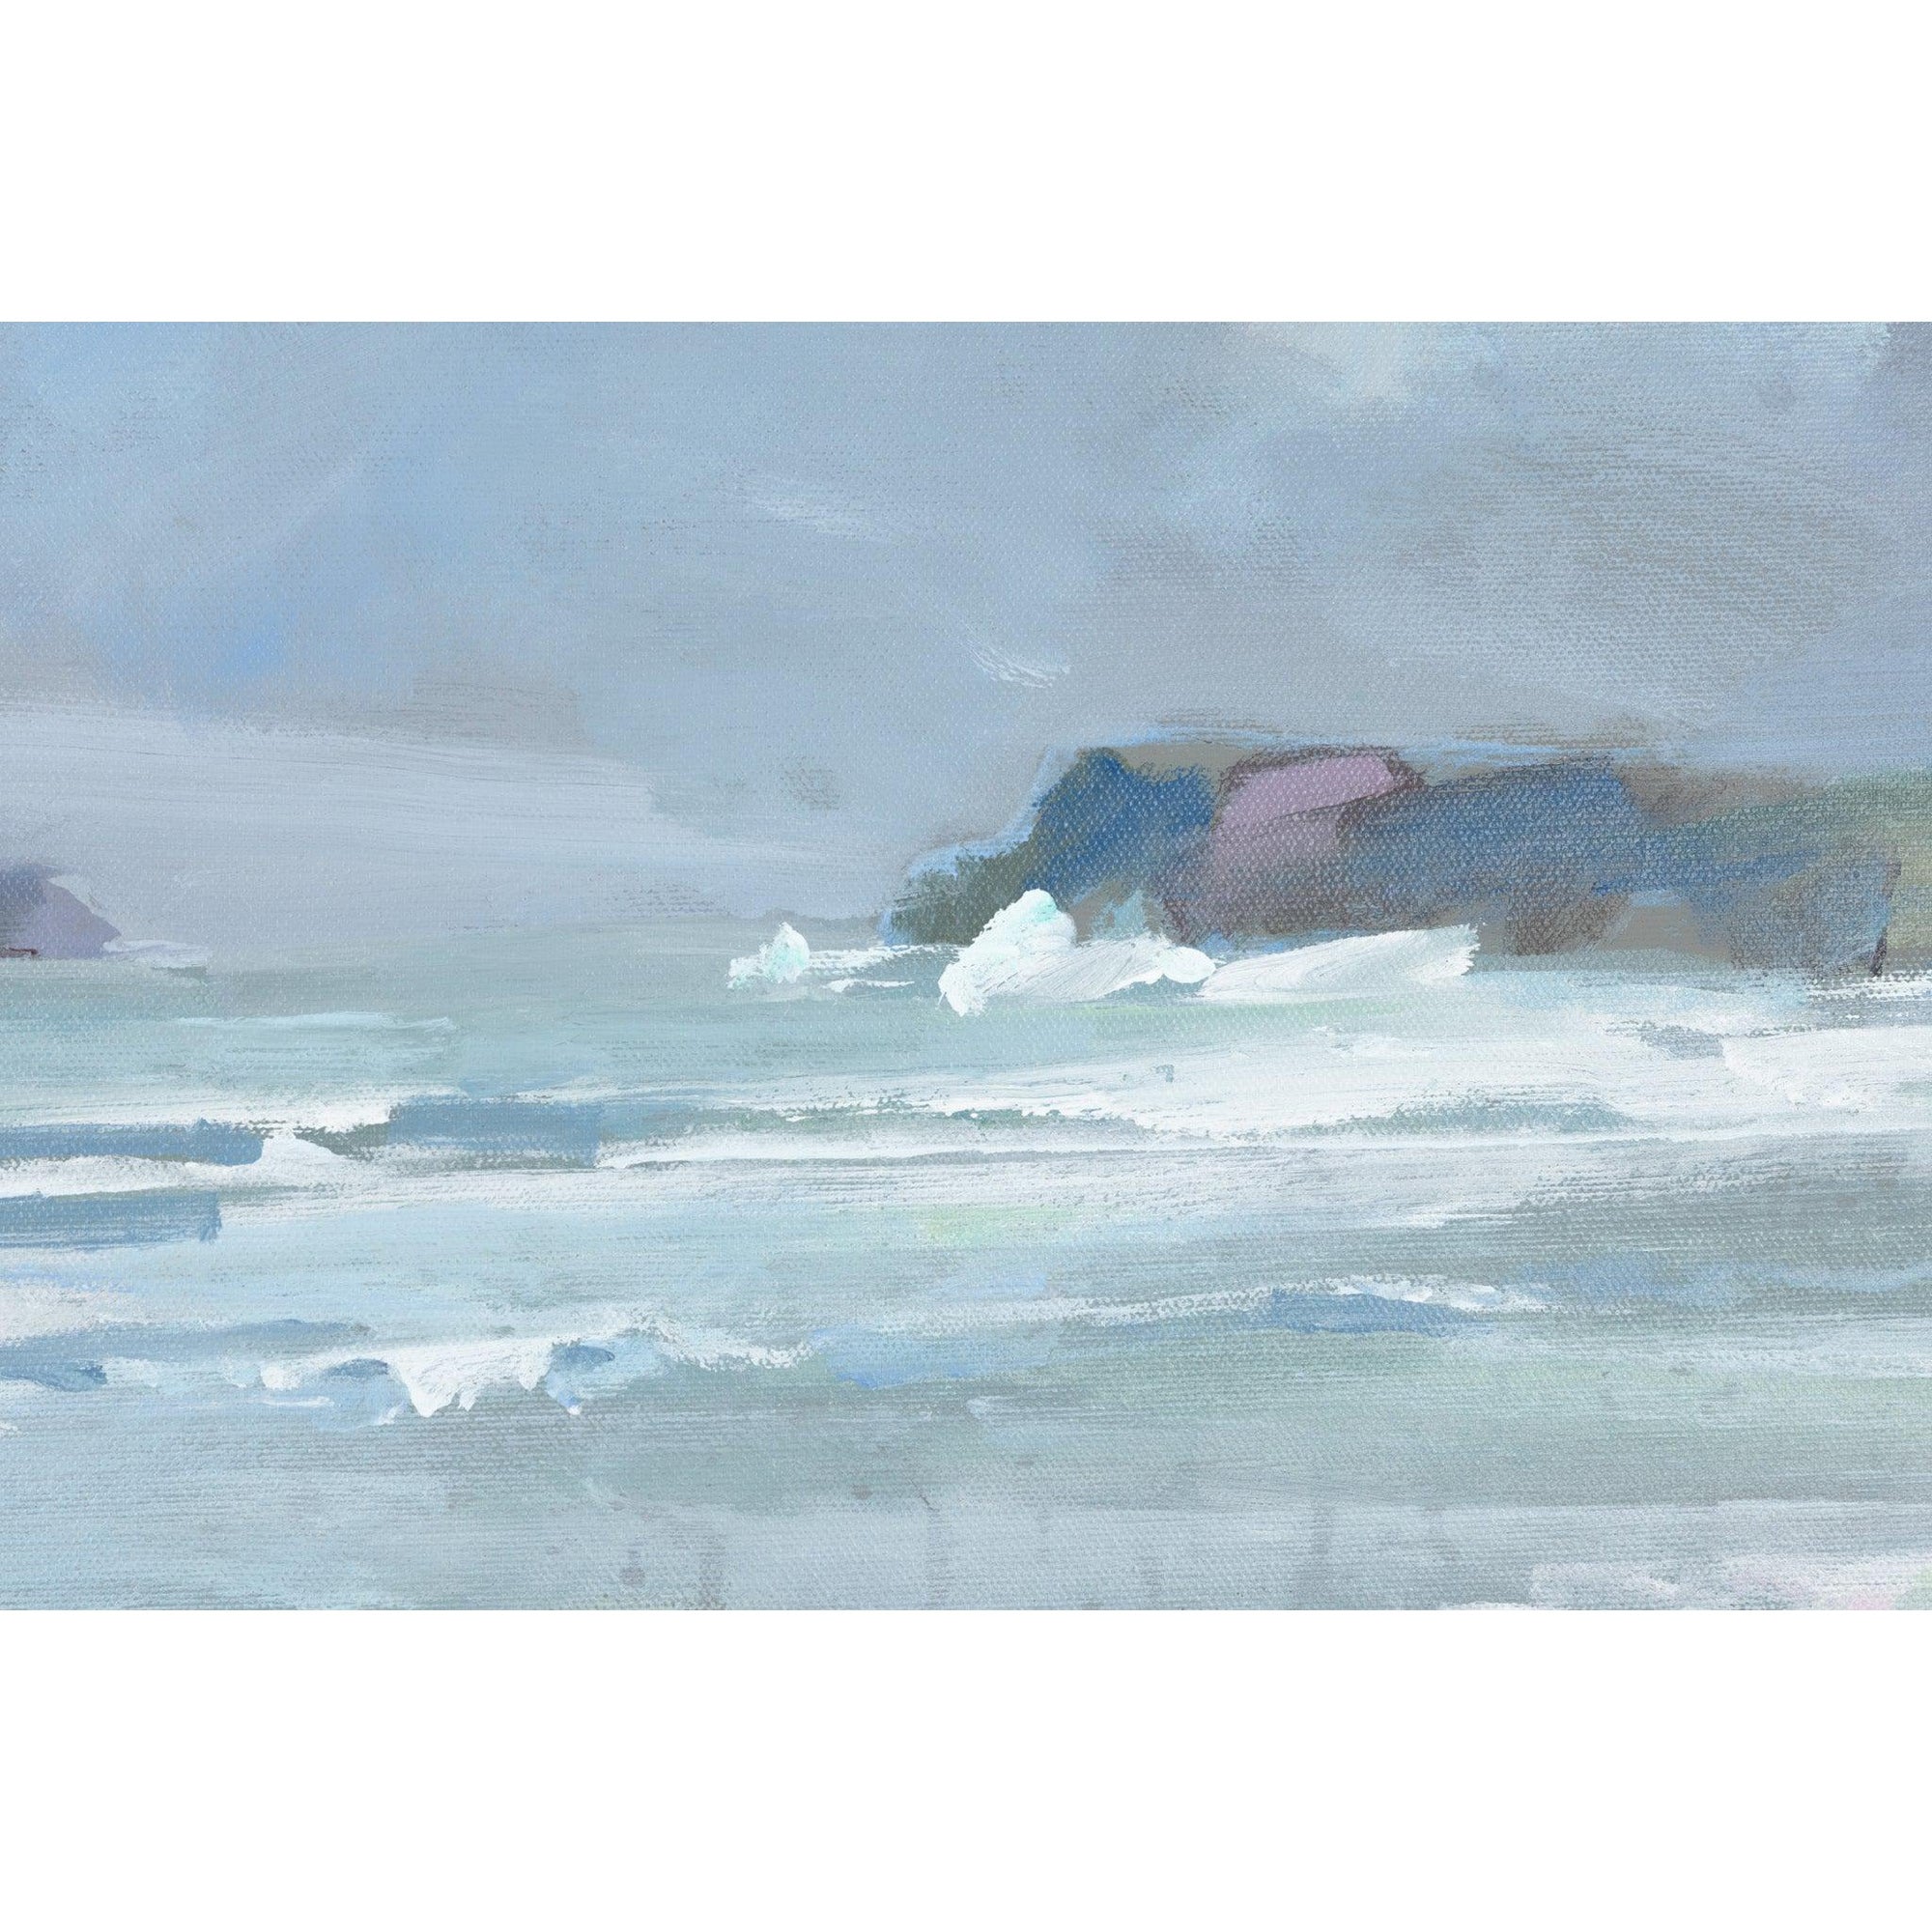 'Polzeath' acrylic original by Andrew Jago, available at Padstow Gallery, Cornwall